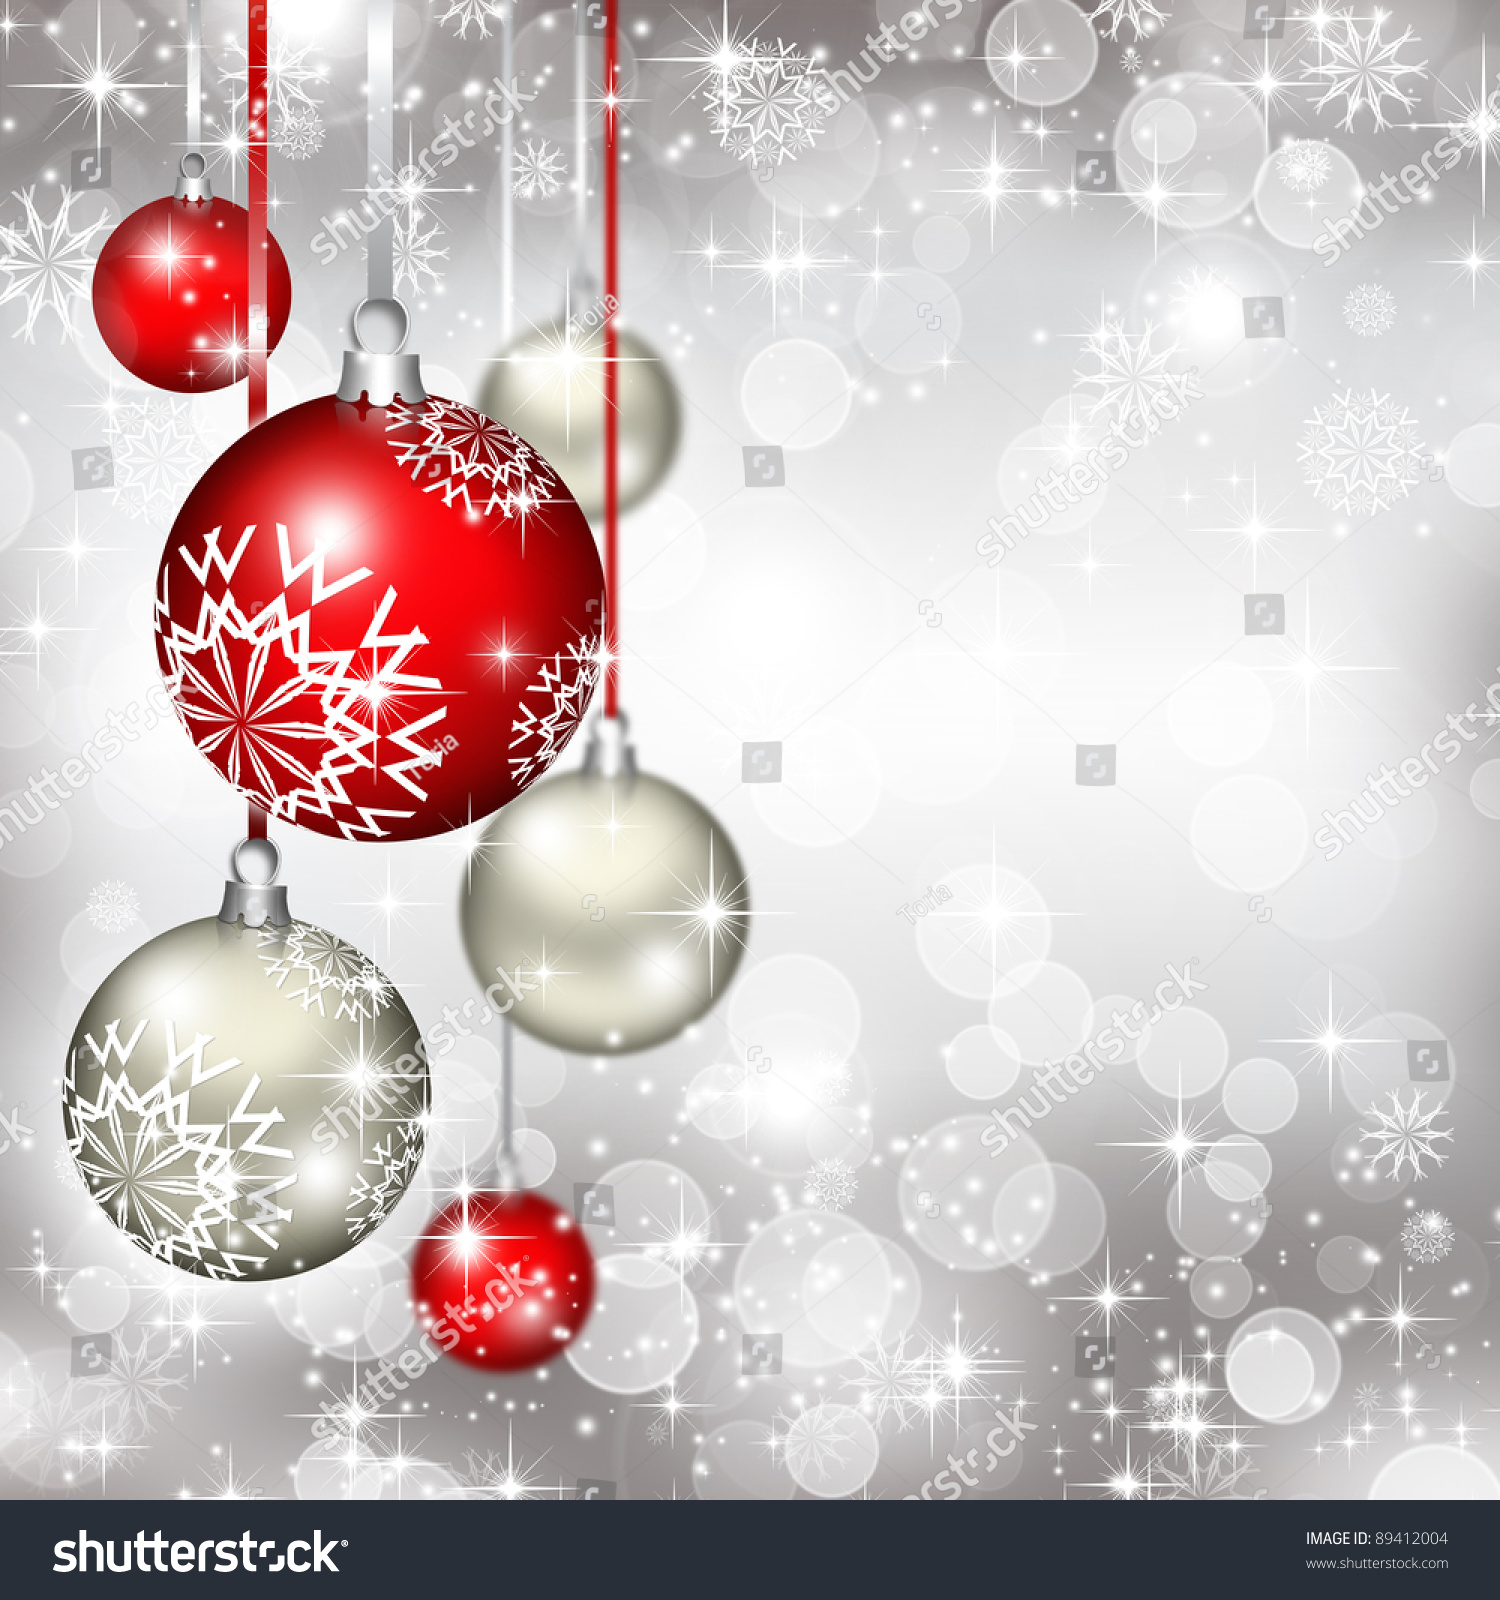 Best Elegant Christmas Background With Red Baubles Stock 